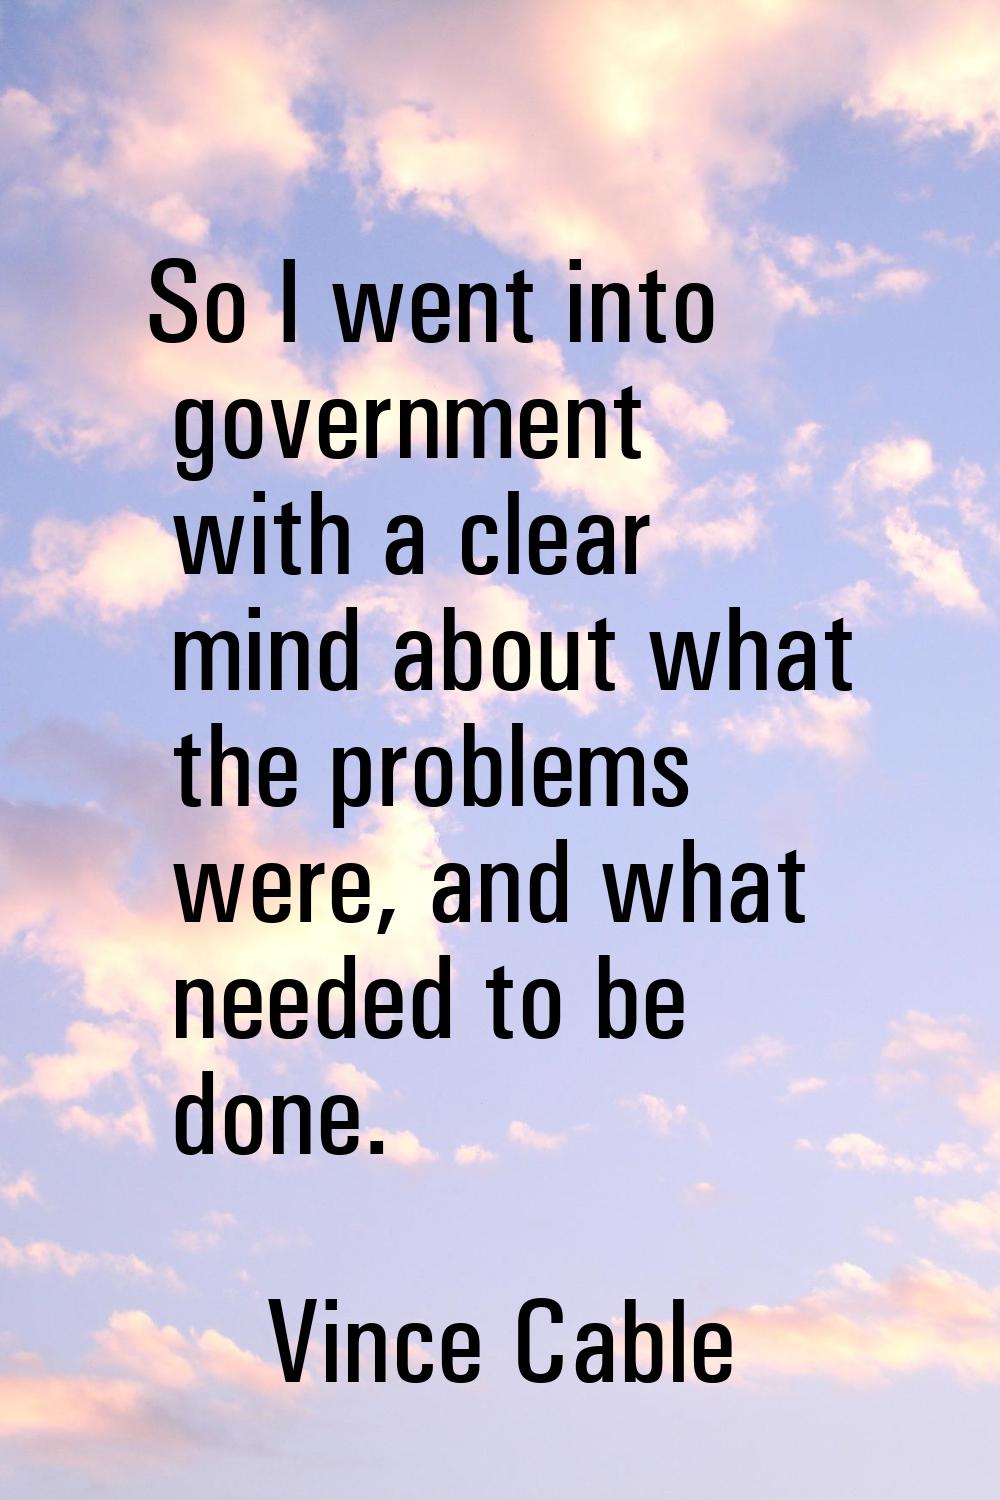 So I went into government with a clear mind about what the problems were, and what needed to be don